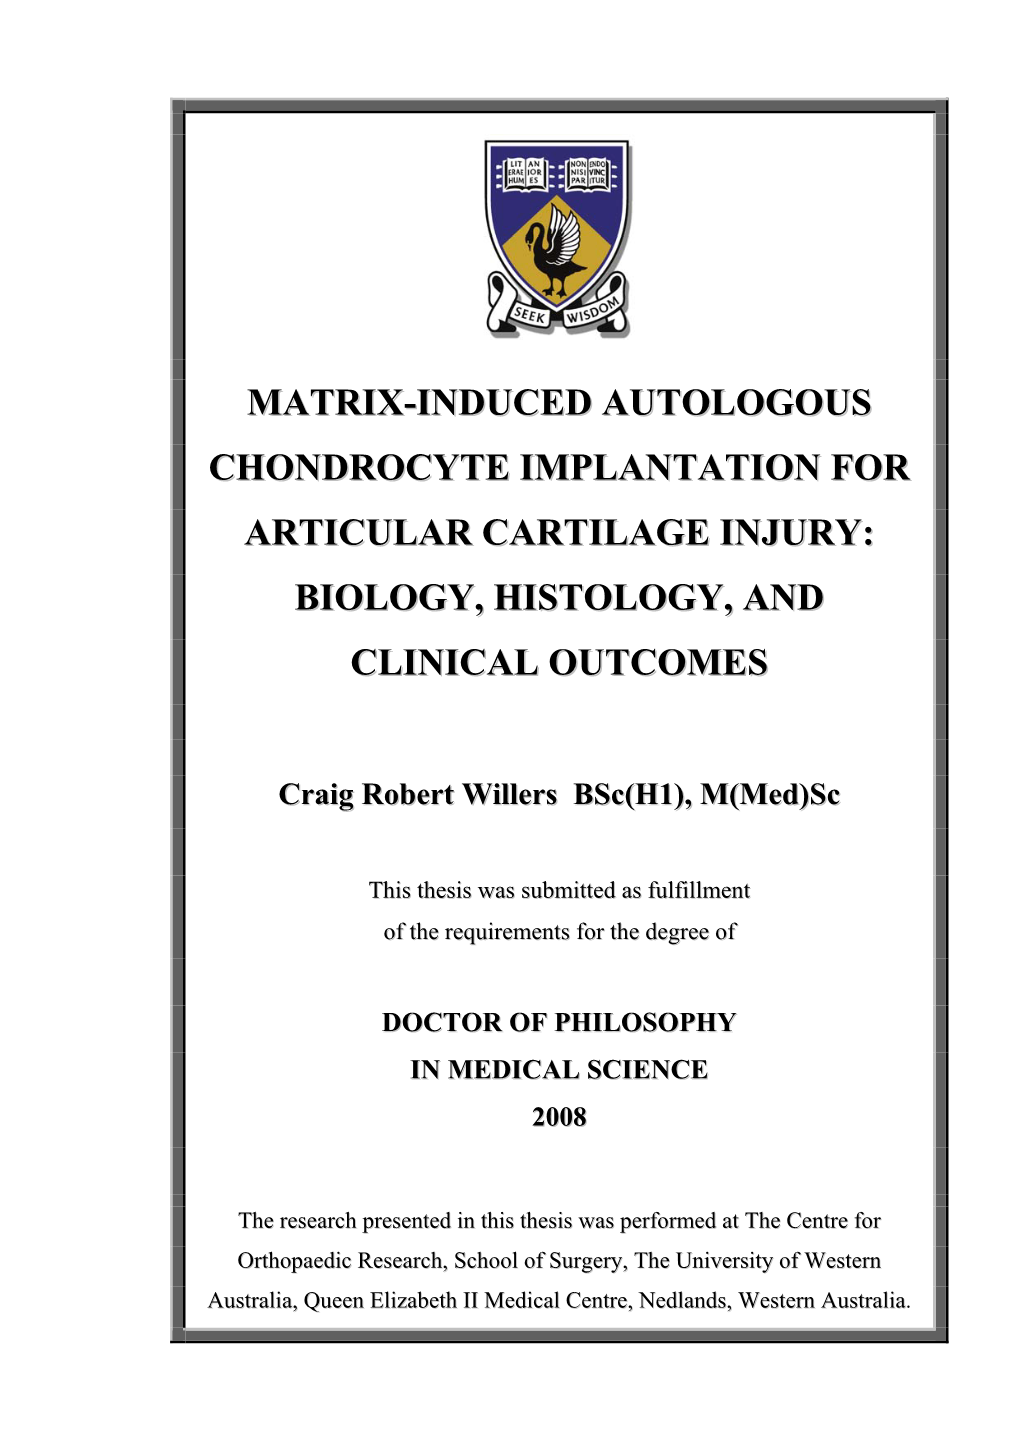 Matrix-Induced Autologous Chondrocyte Implantation for Articular Cartilage Injury: Biology, Histology, and Clinical Outcomes